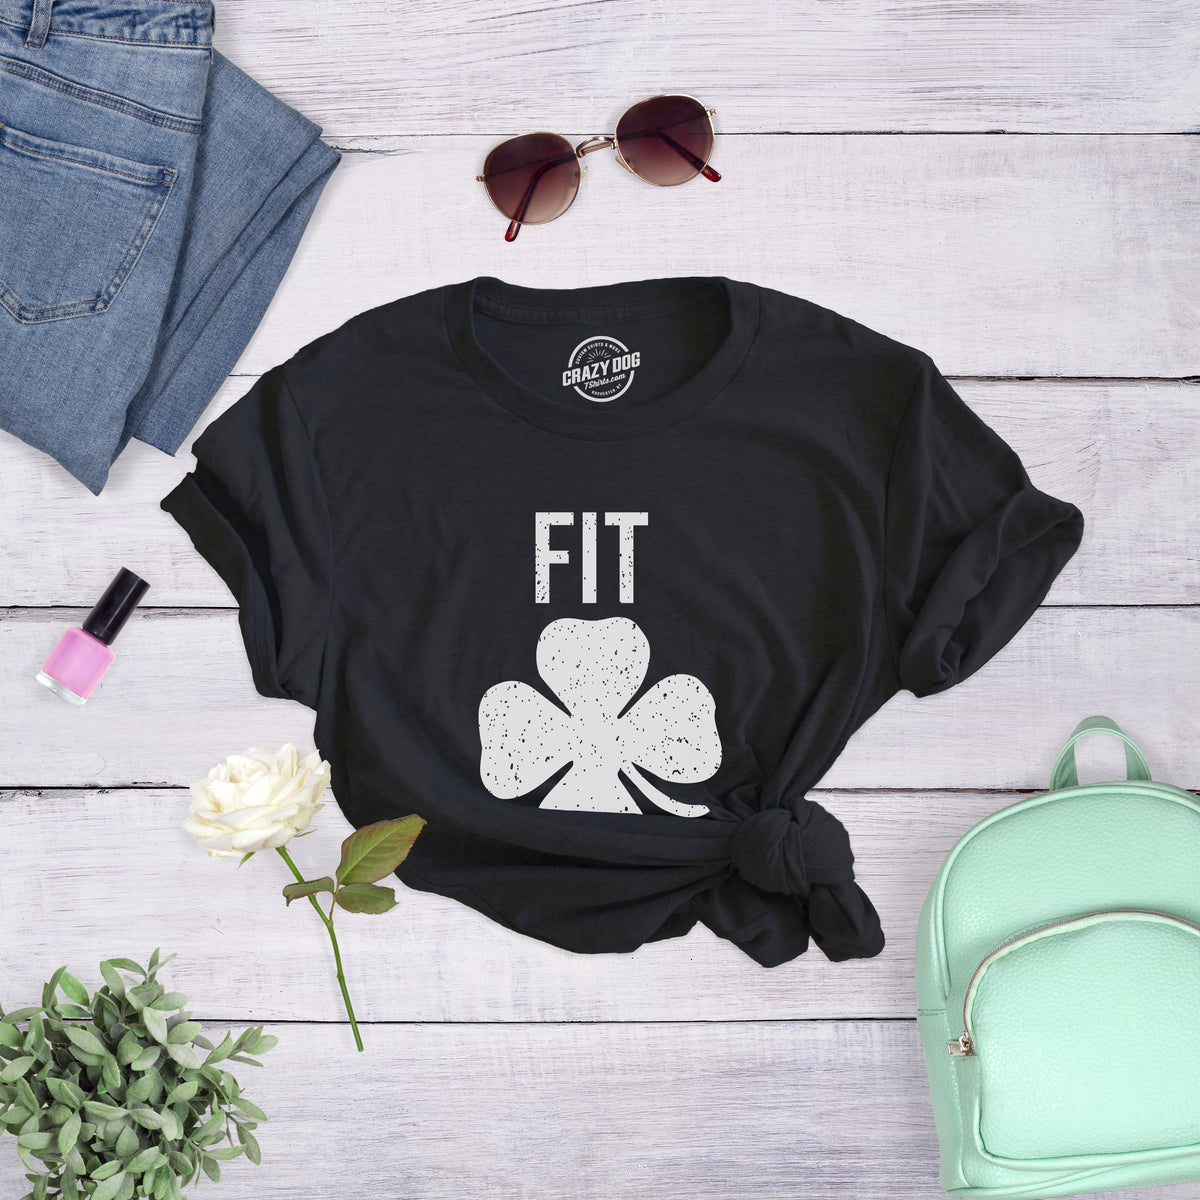 Fit Shaced Women&#39;s T Shirt